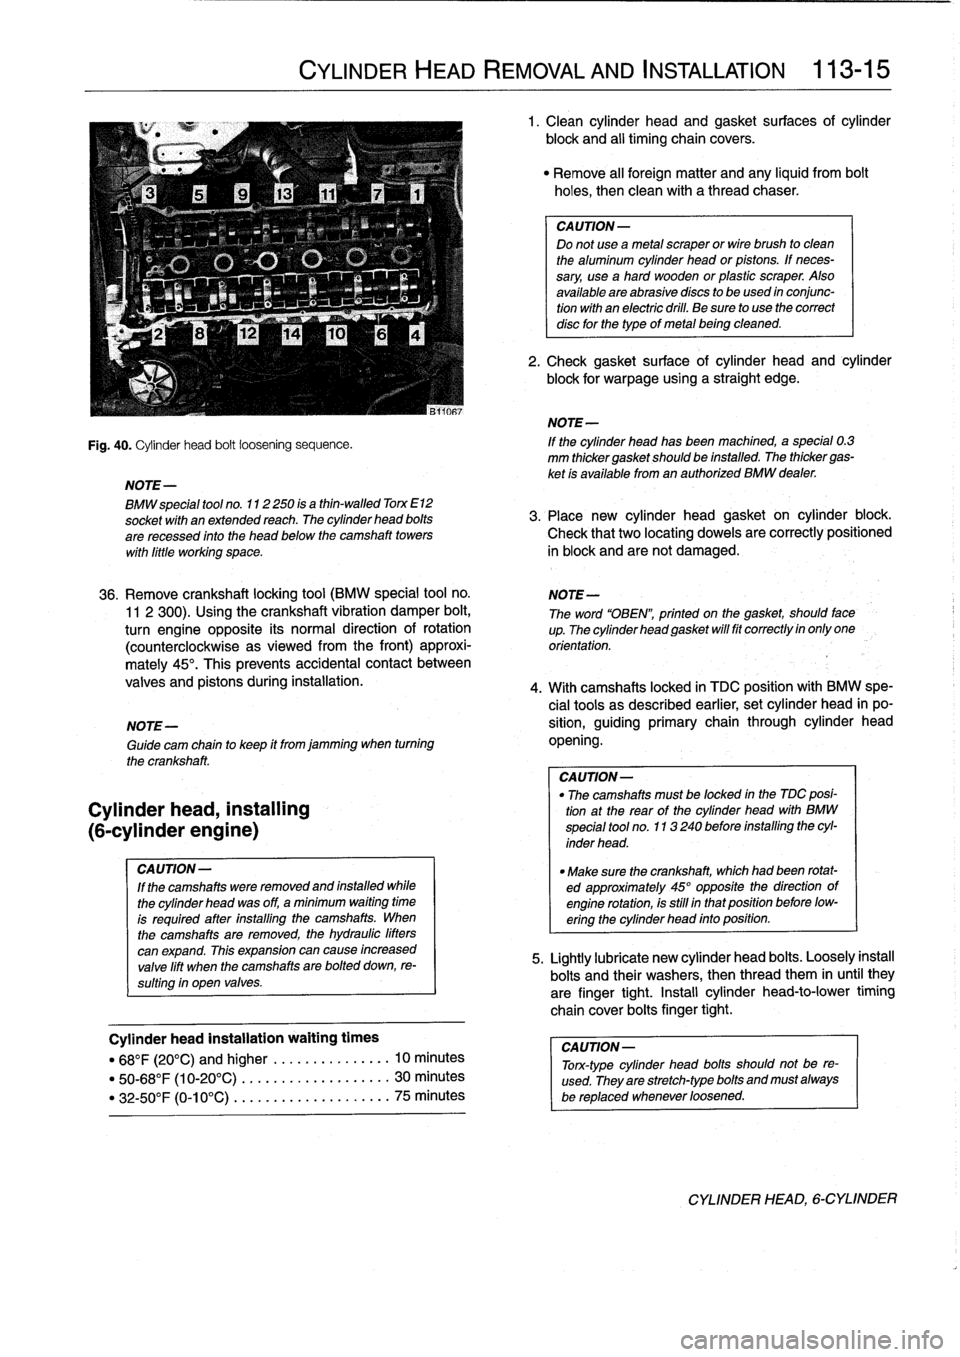 BMW 318i 1997 E36 Workshop Manual 
NOTE-

Cylinder
head,
installing

(6-cylinder
engine)

CAUTION-

If
the
camshafts
were
removed
and
installed
while

the
cylinder
head
was
off,
a
minimum
waiting
time

is
required
after
ínstalling
th